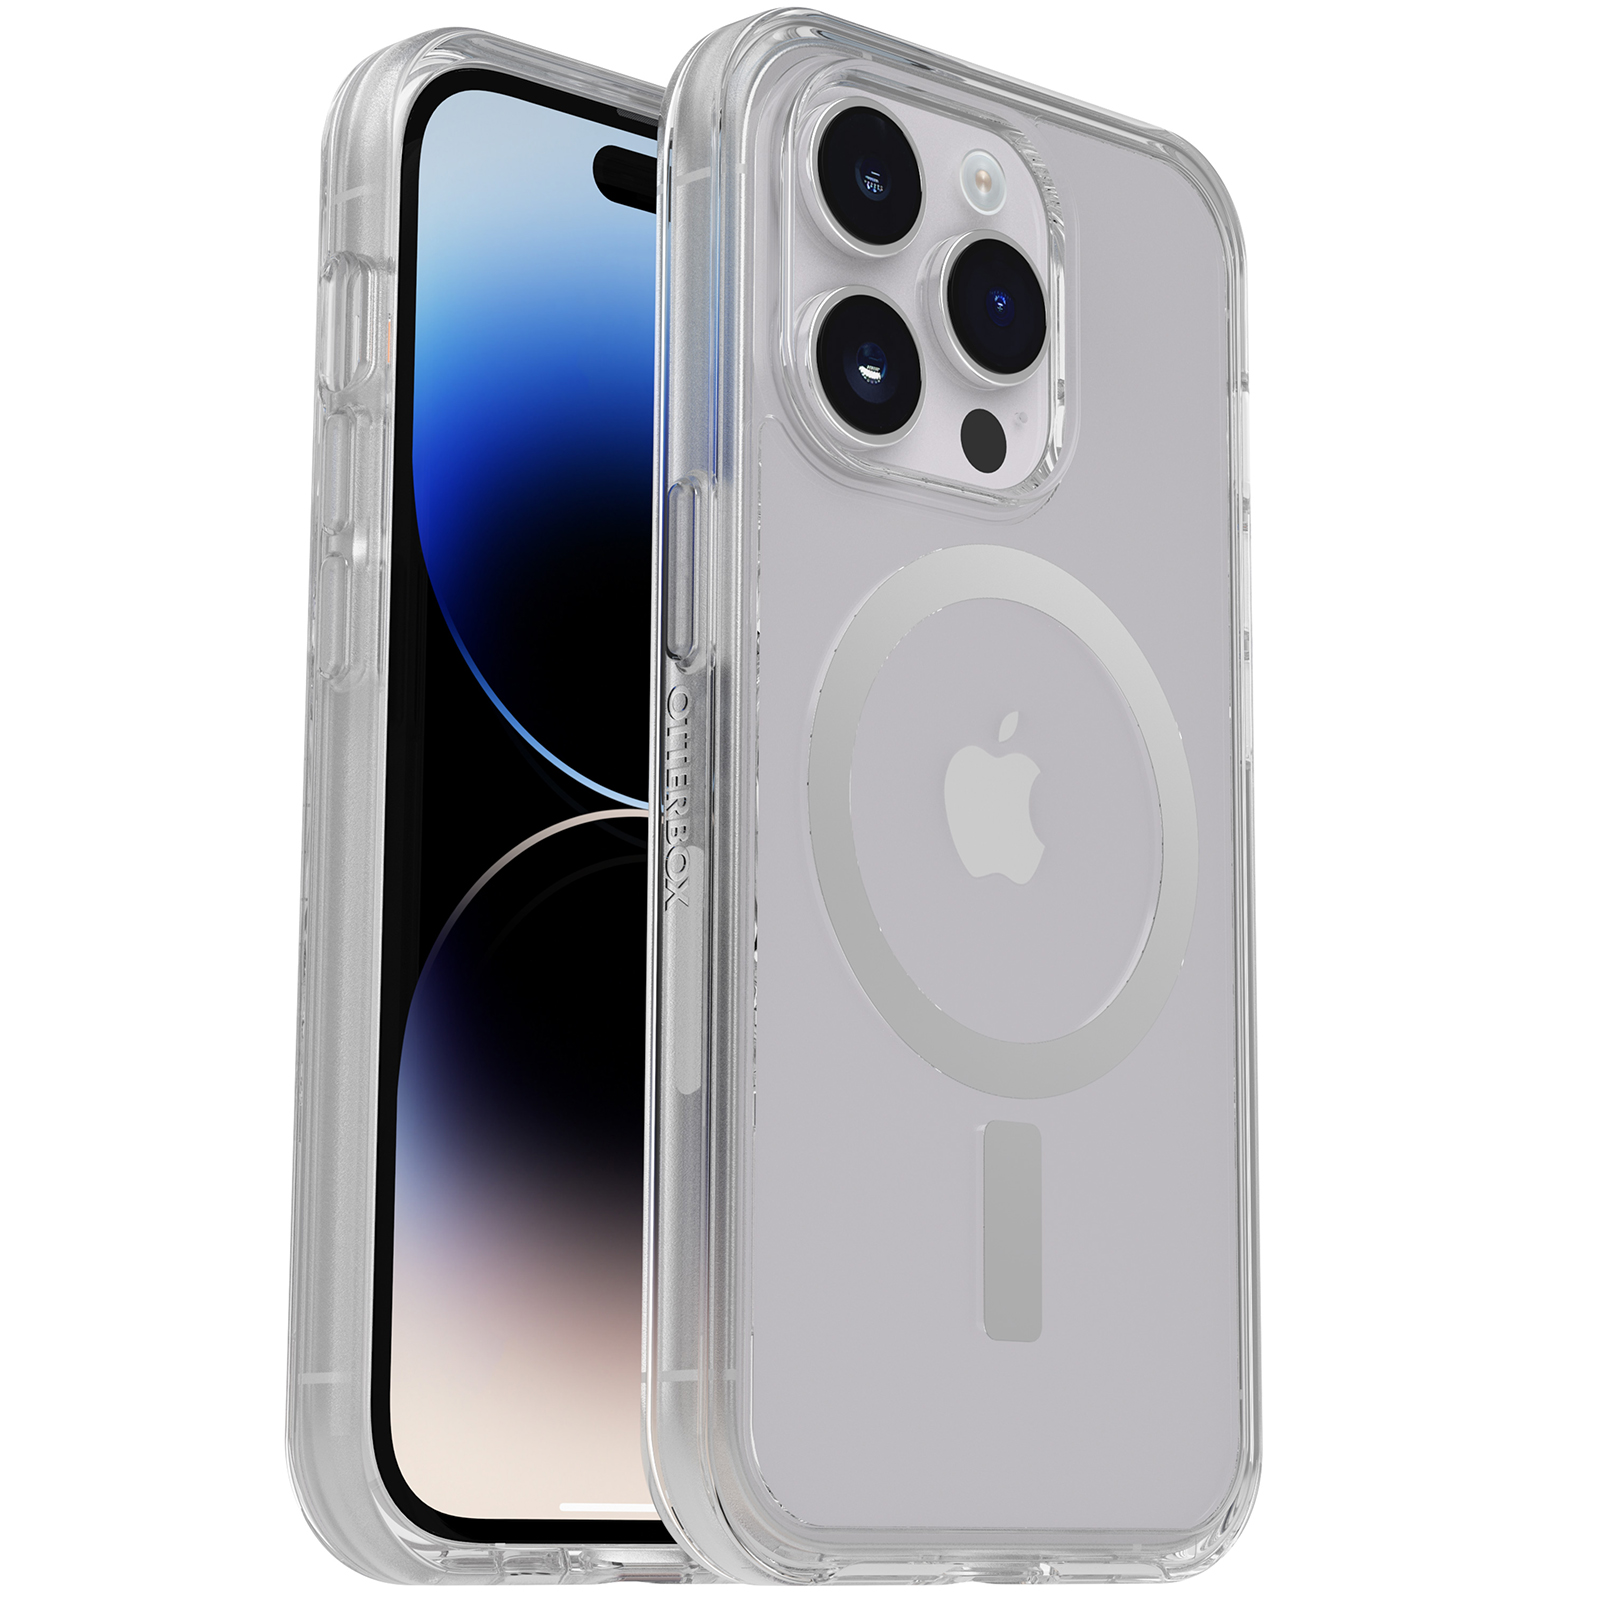 https://www.otterbox.com/on/demandware.static/-/Sites-masterCatalog/default/dw4566faba/productimages/dis/cases-screen-protection/symmetry-plus-iphd22/symmetry-plus-iphd22-clear-1.jpg